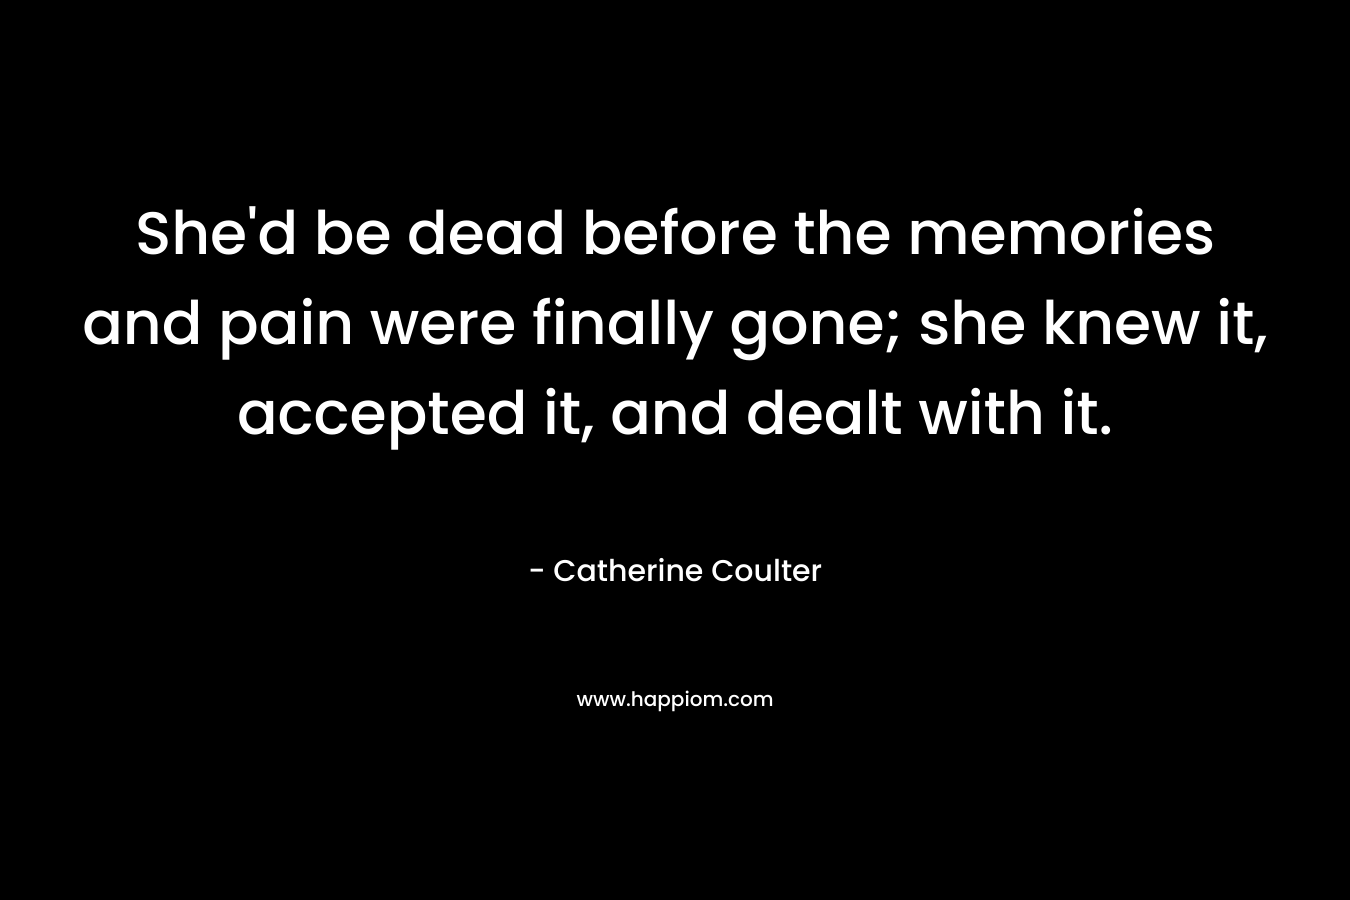 She'd be dead before the memories and pain were finally gone; she knew it, accepted it, and dealt with it.